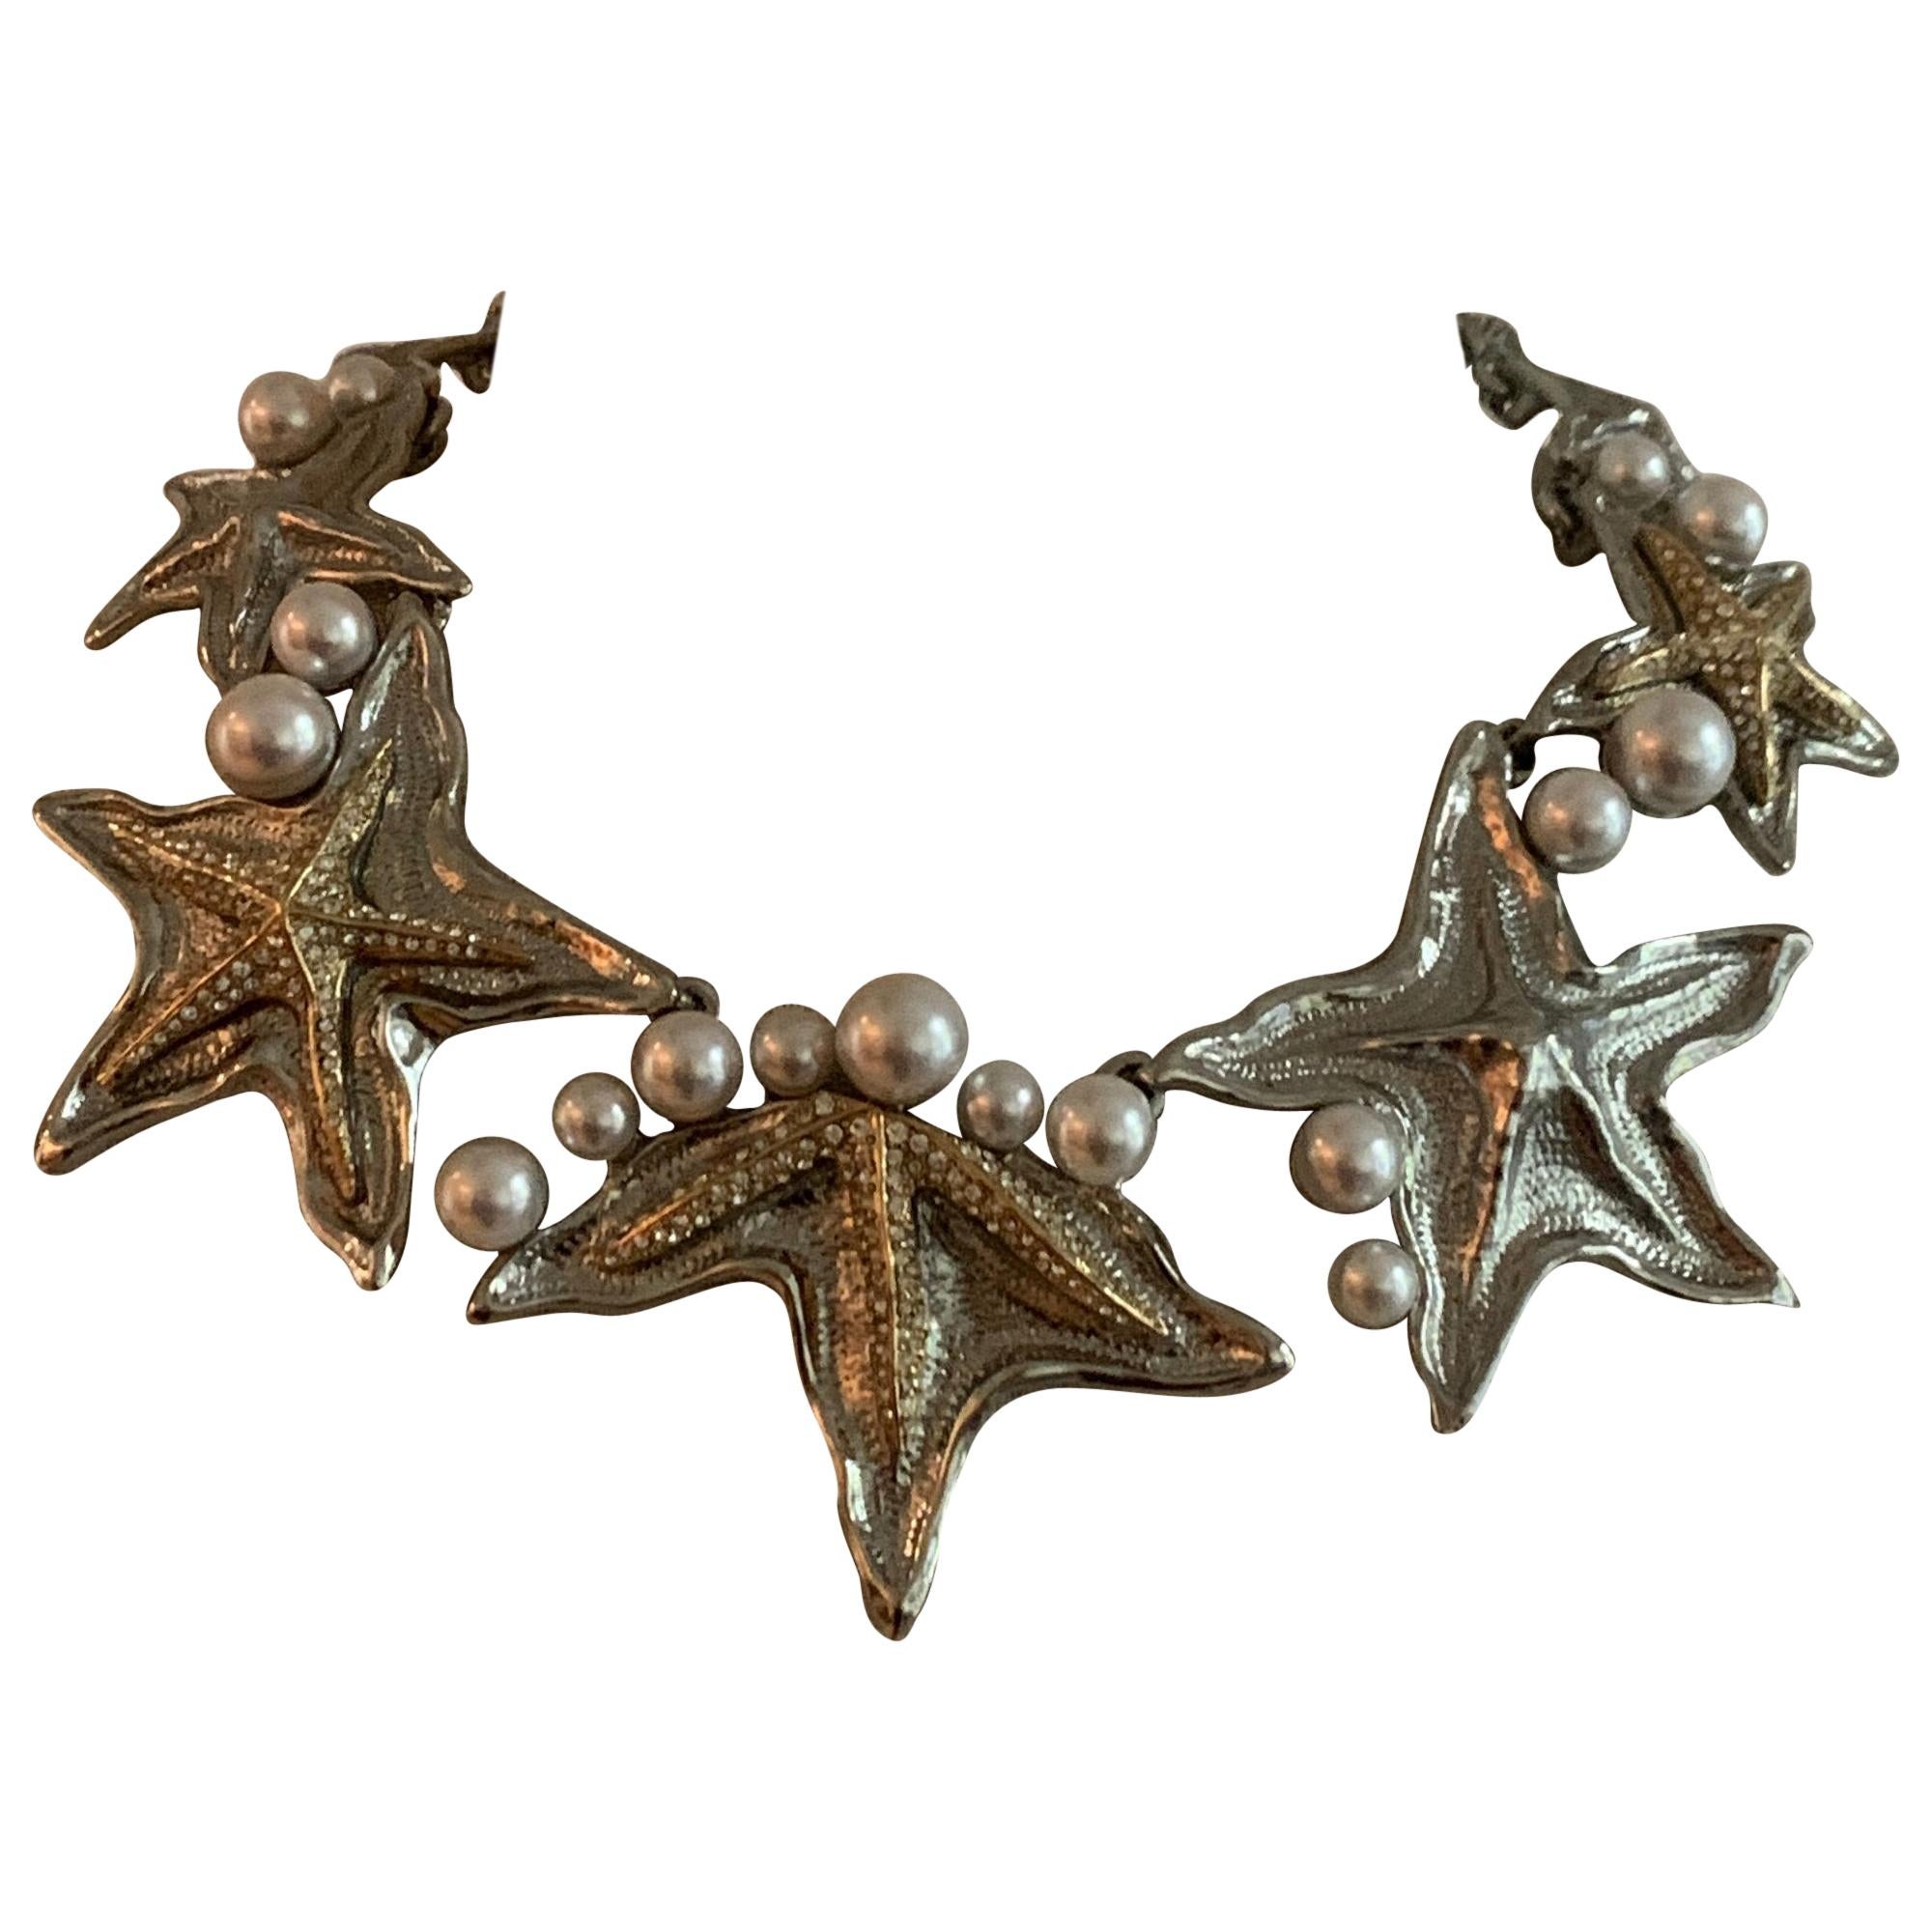 Oscar de la Renta Starfish Necklace in Silver and Gold Tone with Faux Pearls For Sale